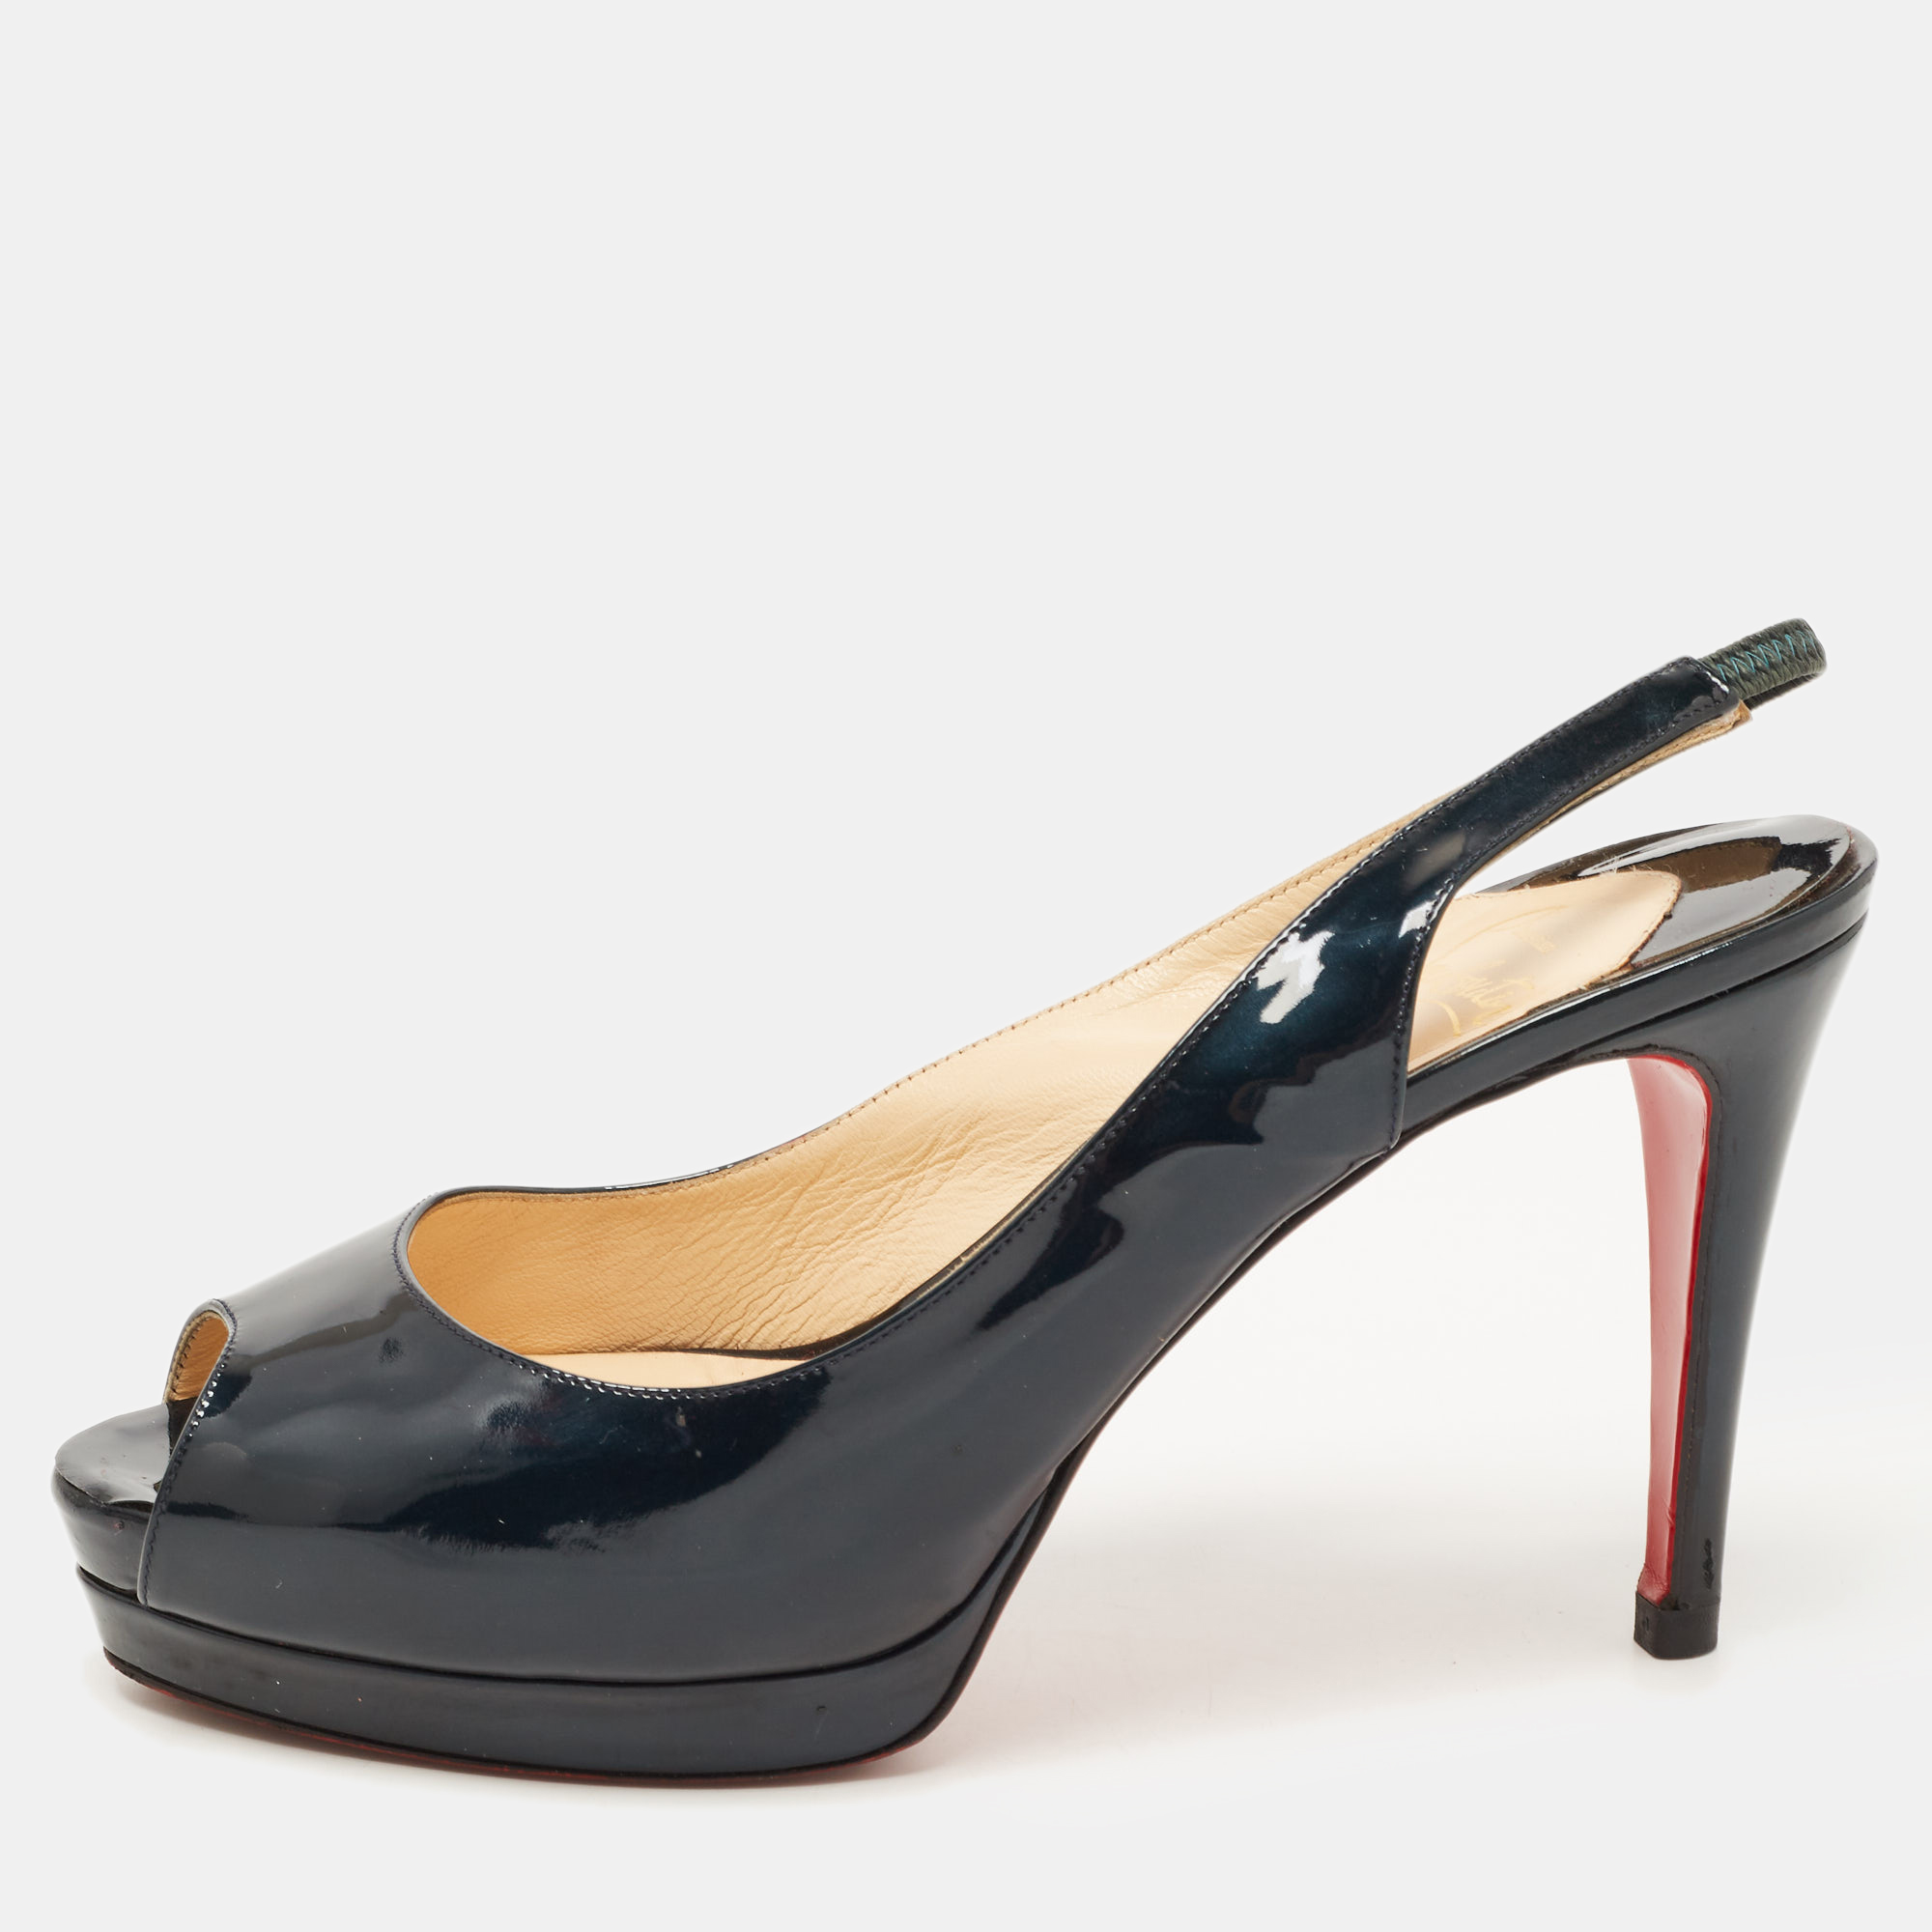 Christian Louboutin Green Patent Leather Private Number Peep Toe Slingback Sandals Size 39